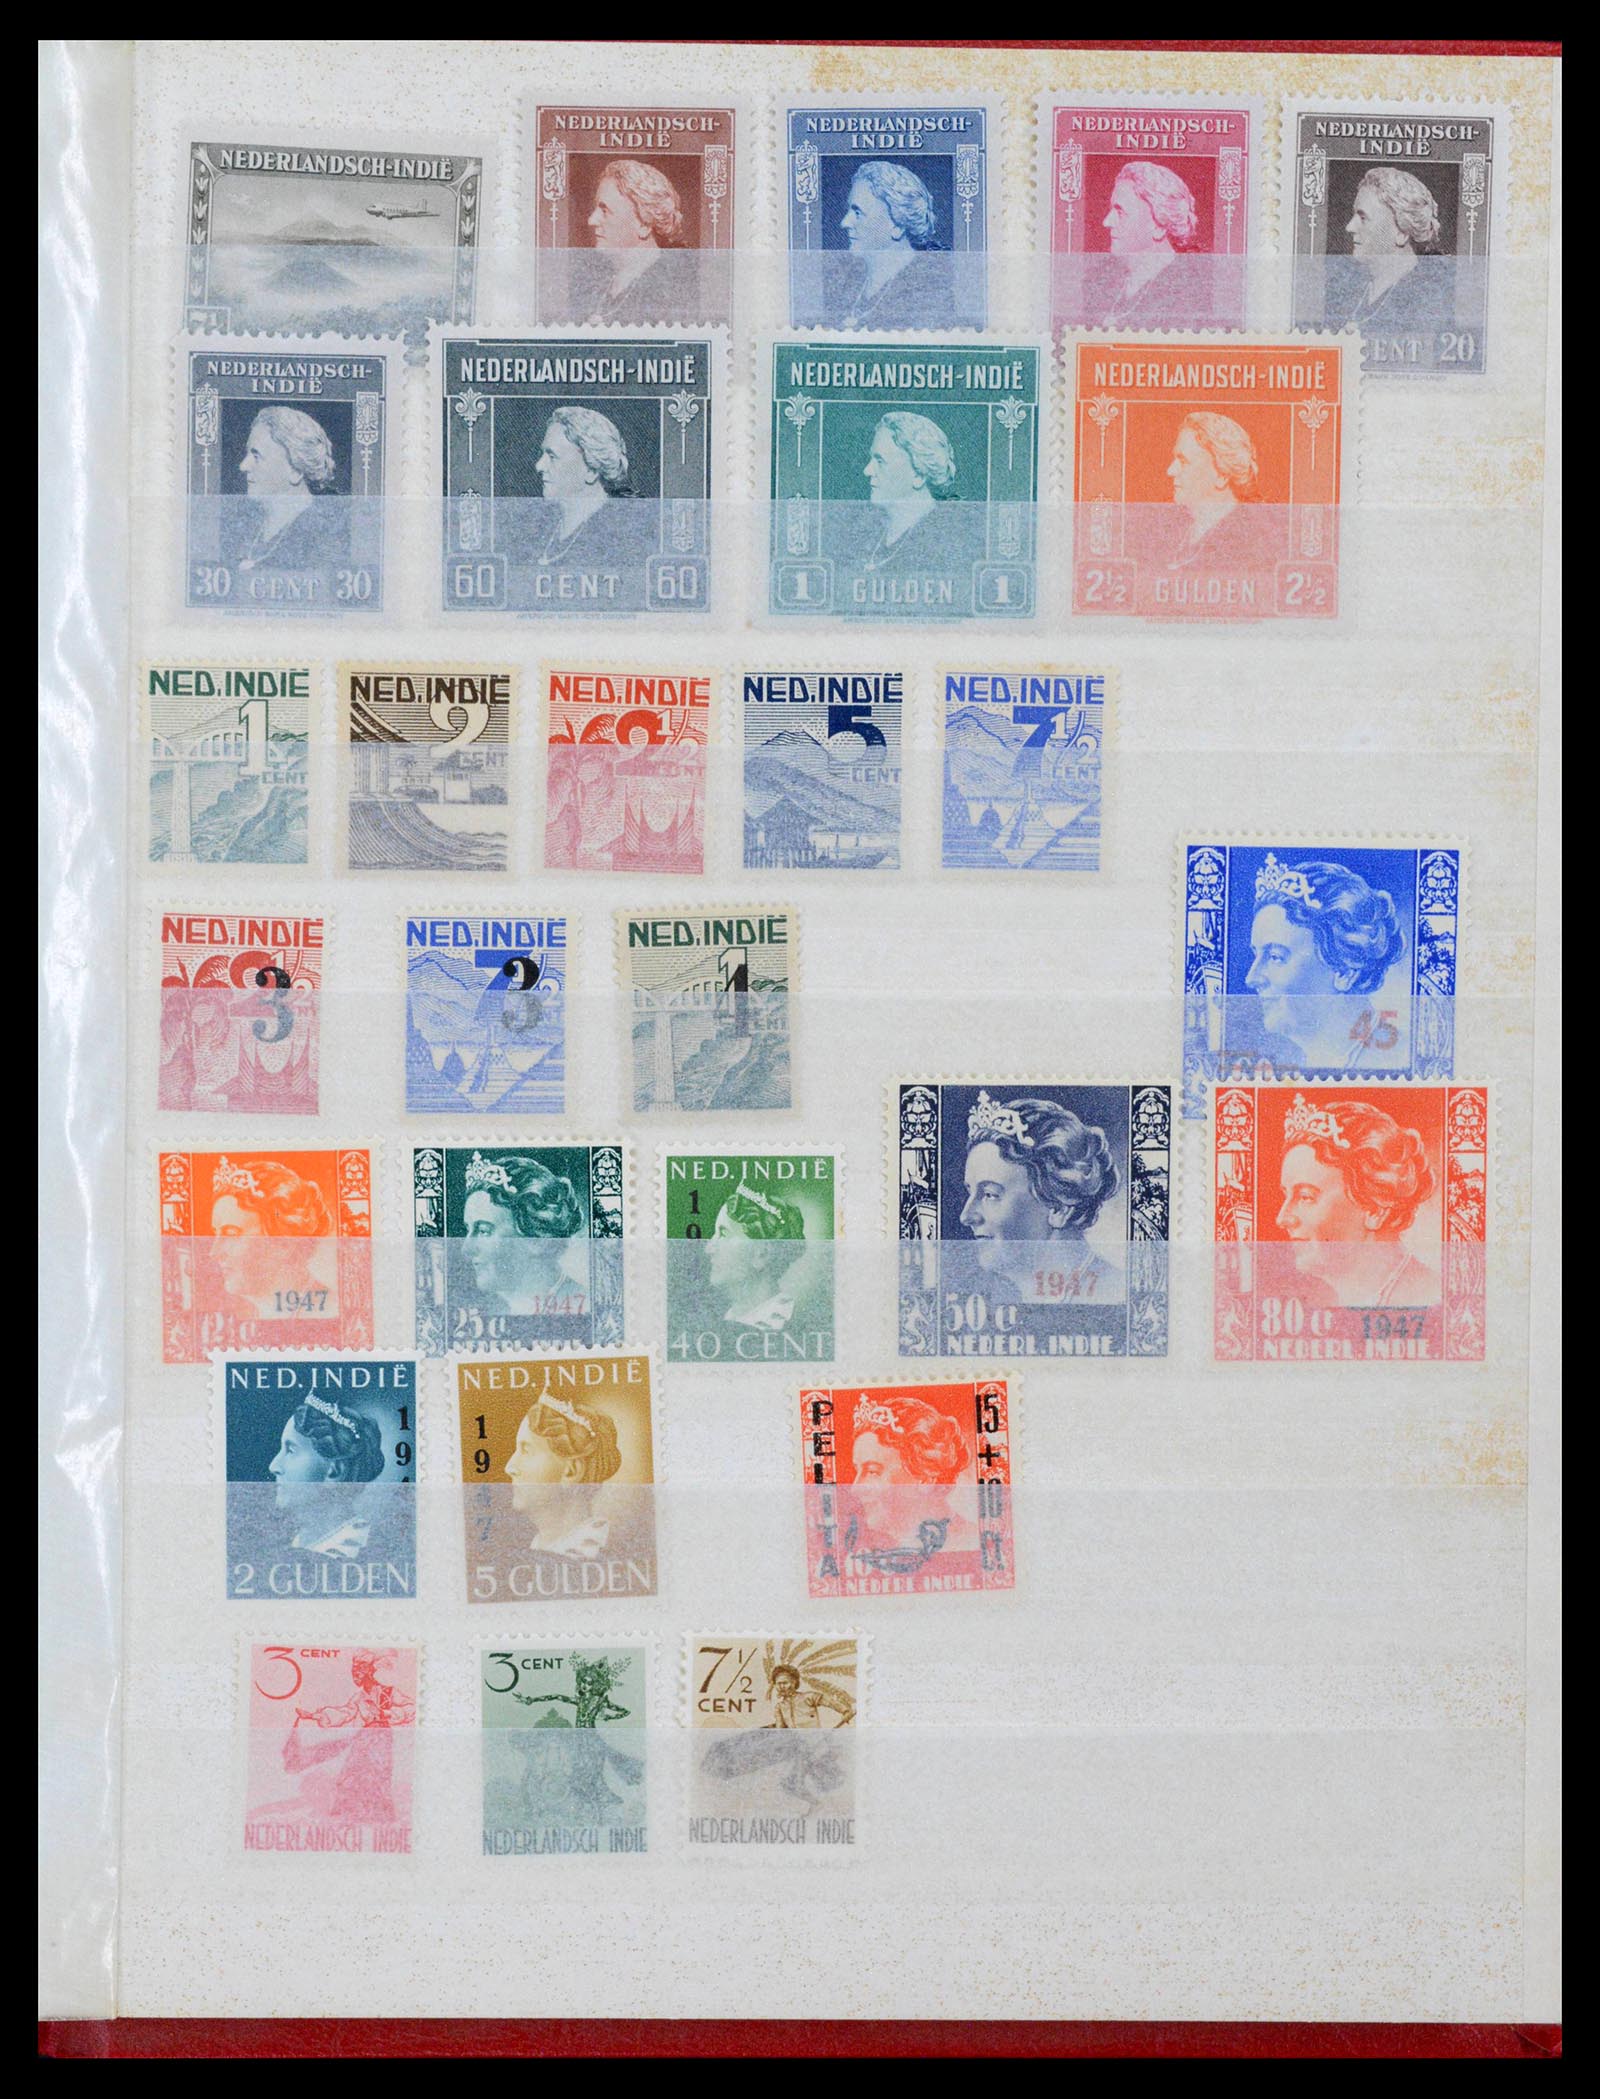 39359 0011 - Stamp collection 39359 Dutch east Indies 1864-1948.